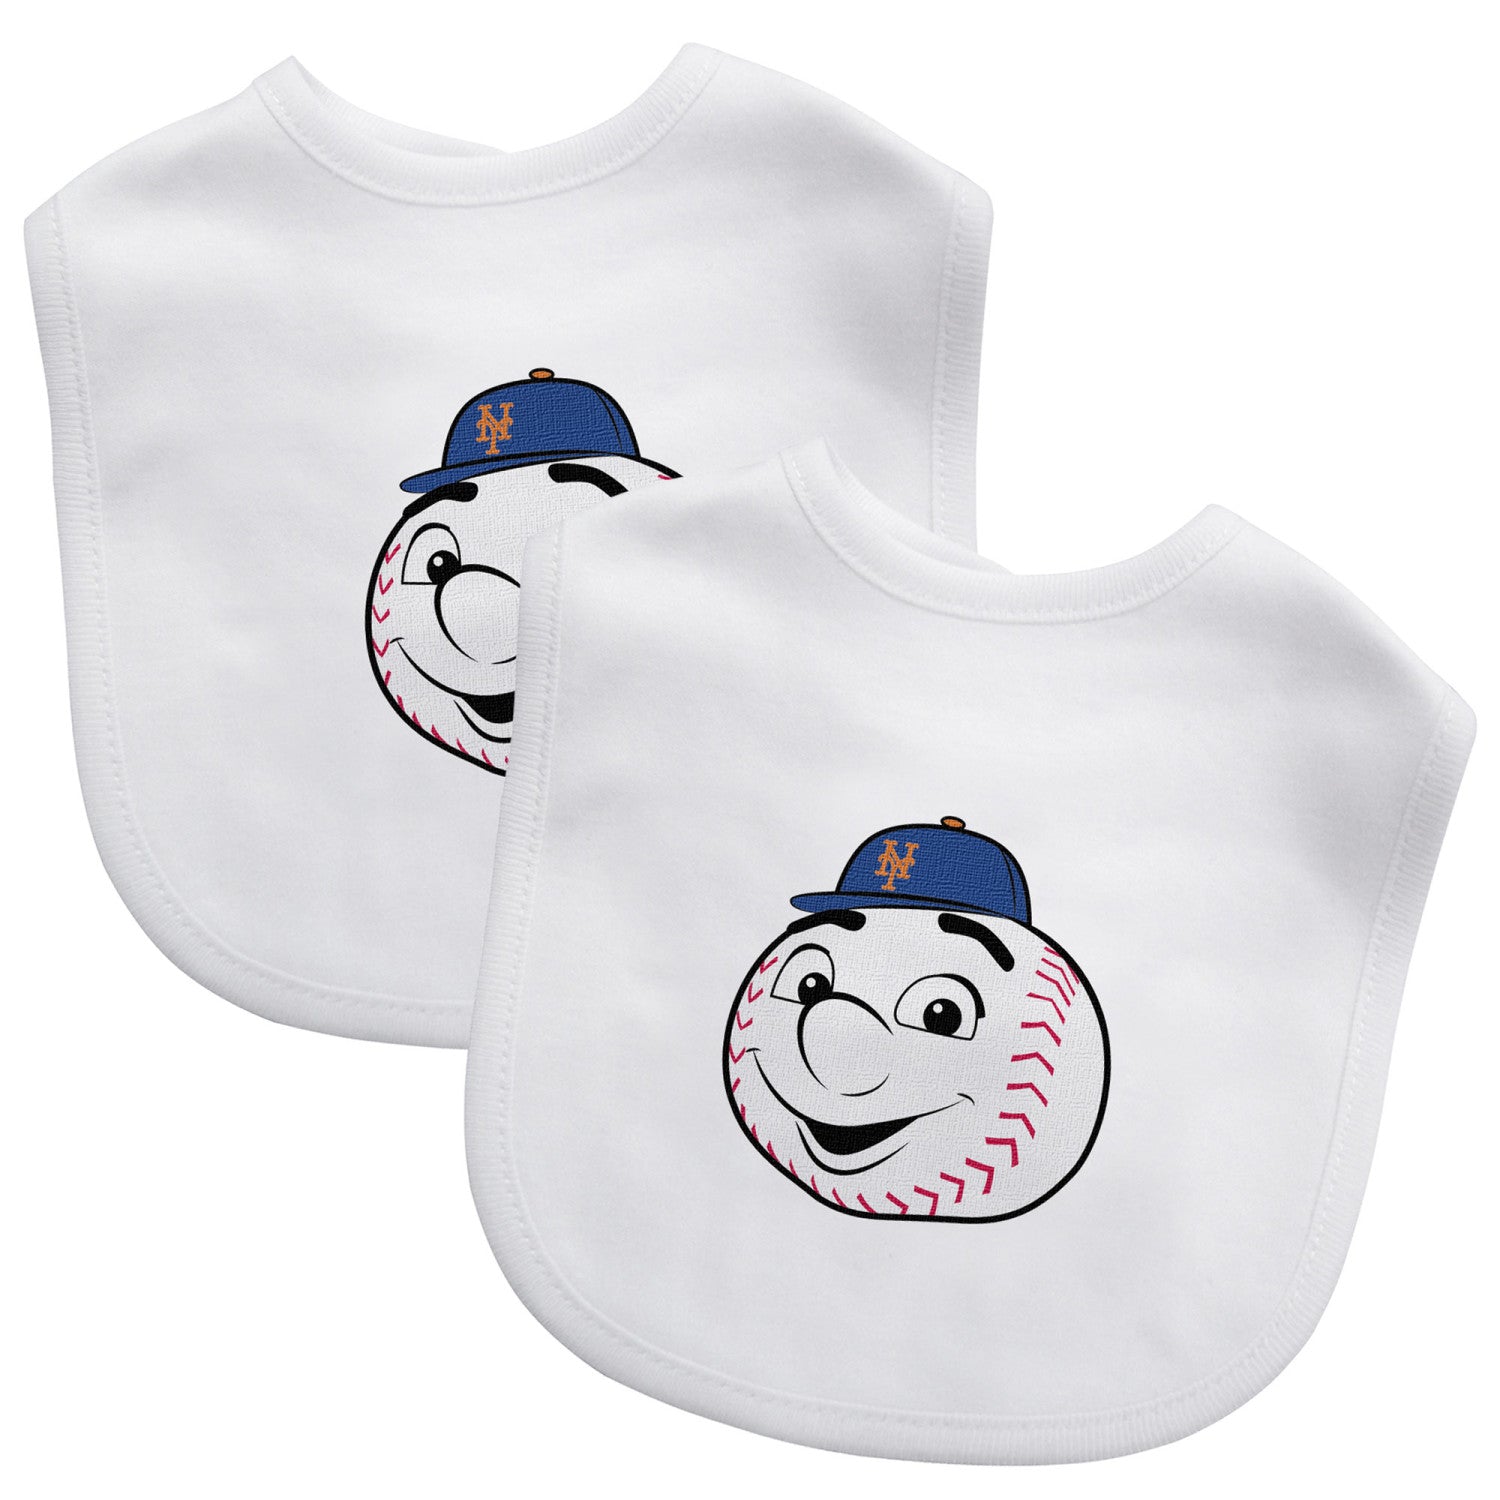 Baby Fanatic Officially Licensed Unisex Baby Bibs 2 Pack - MLB St